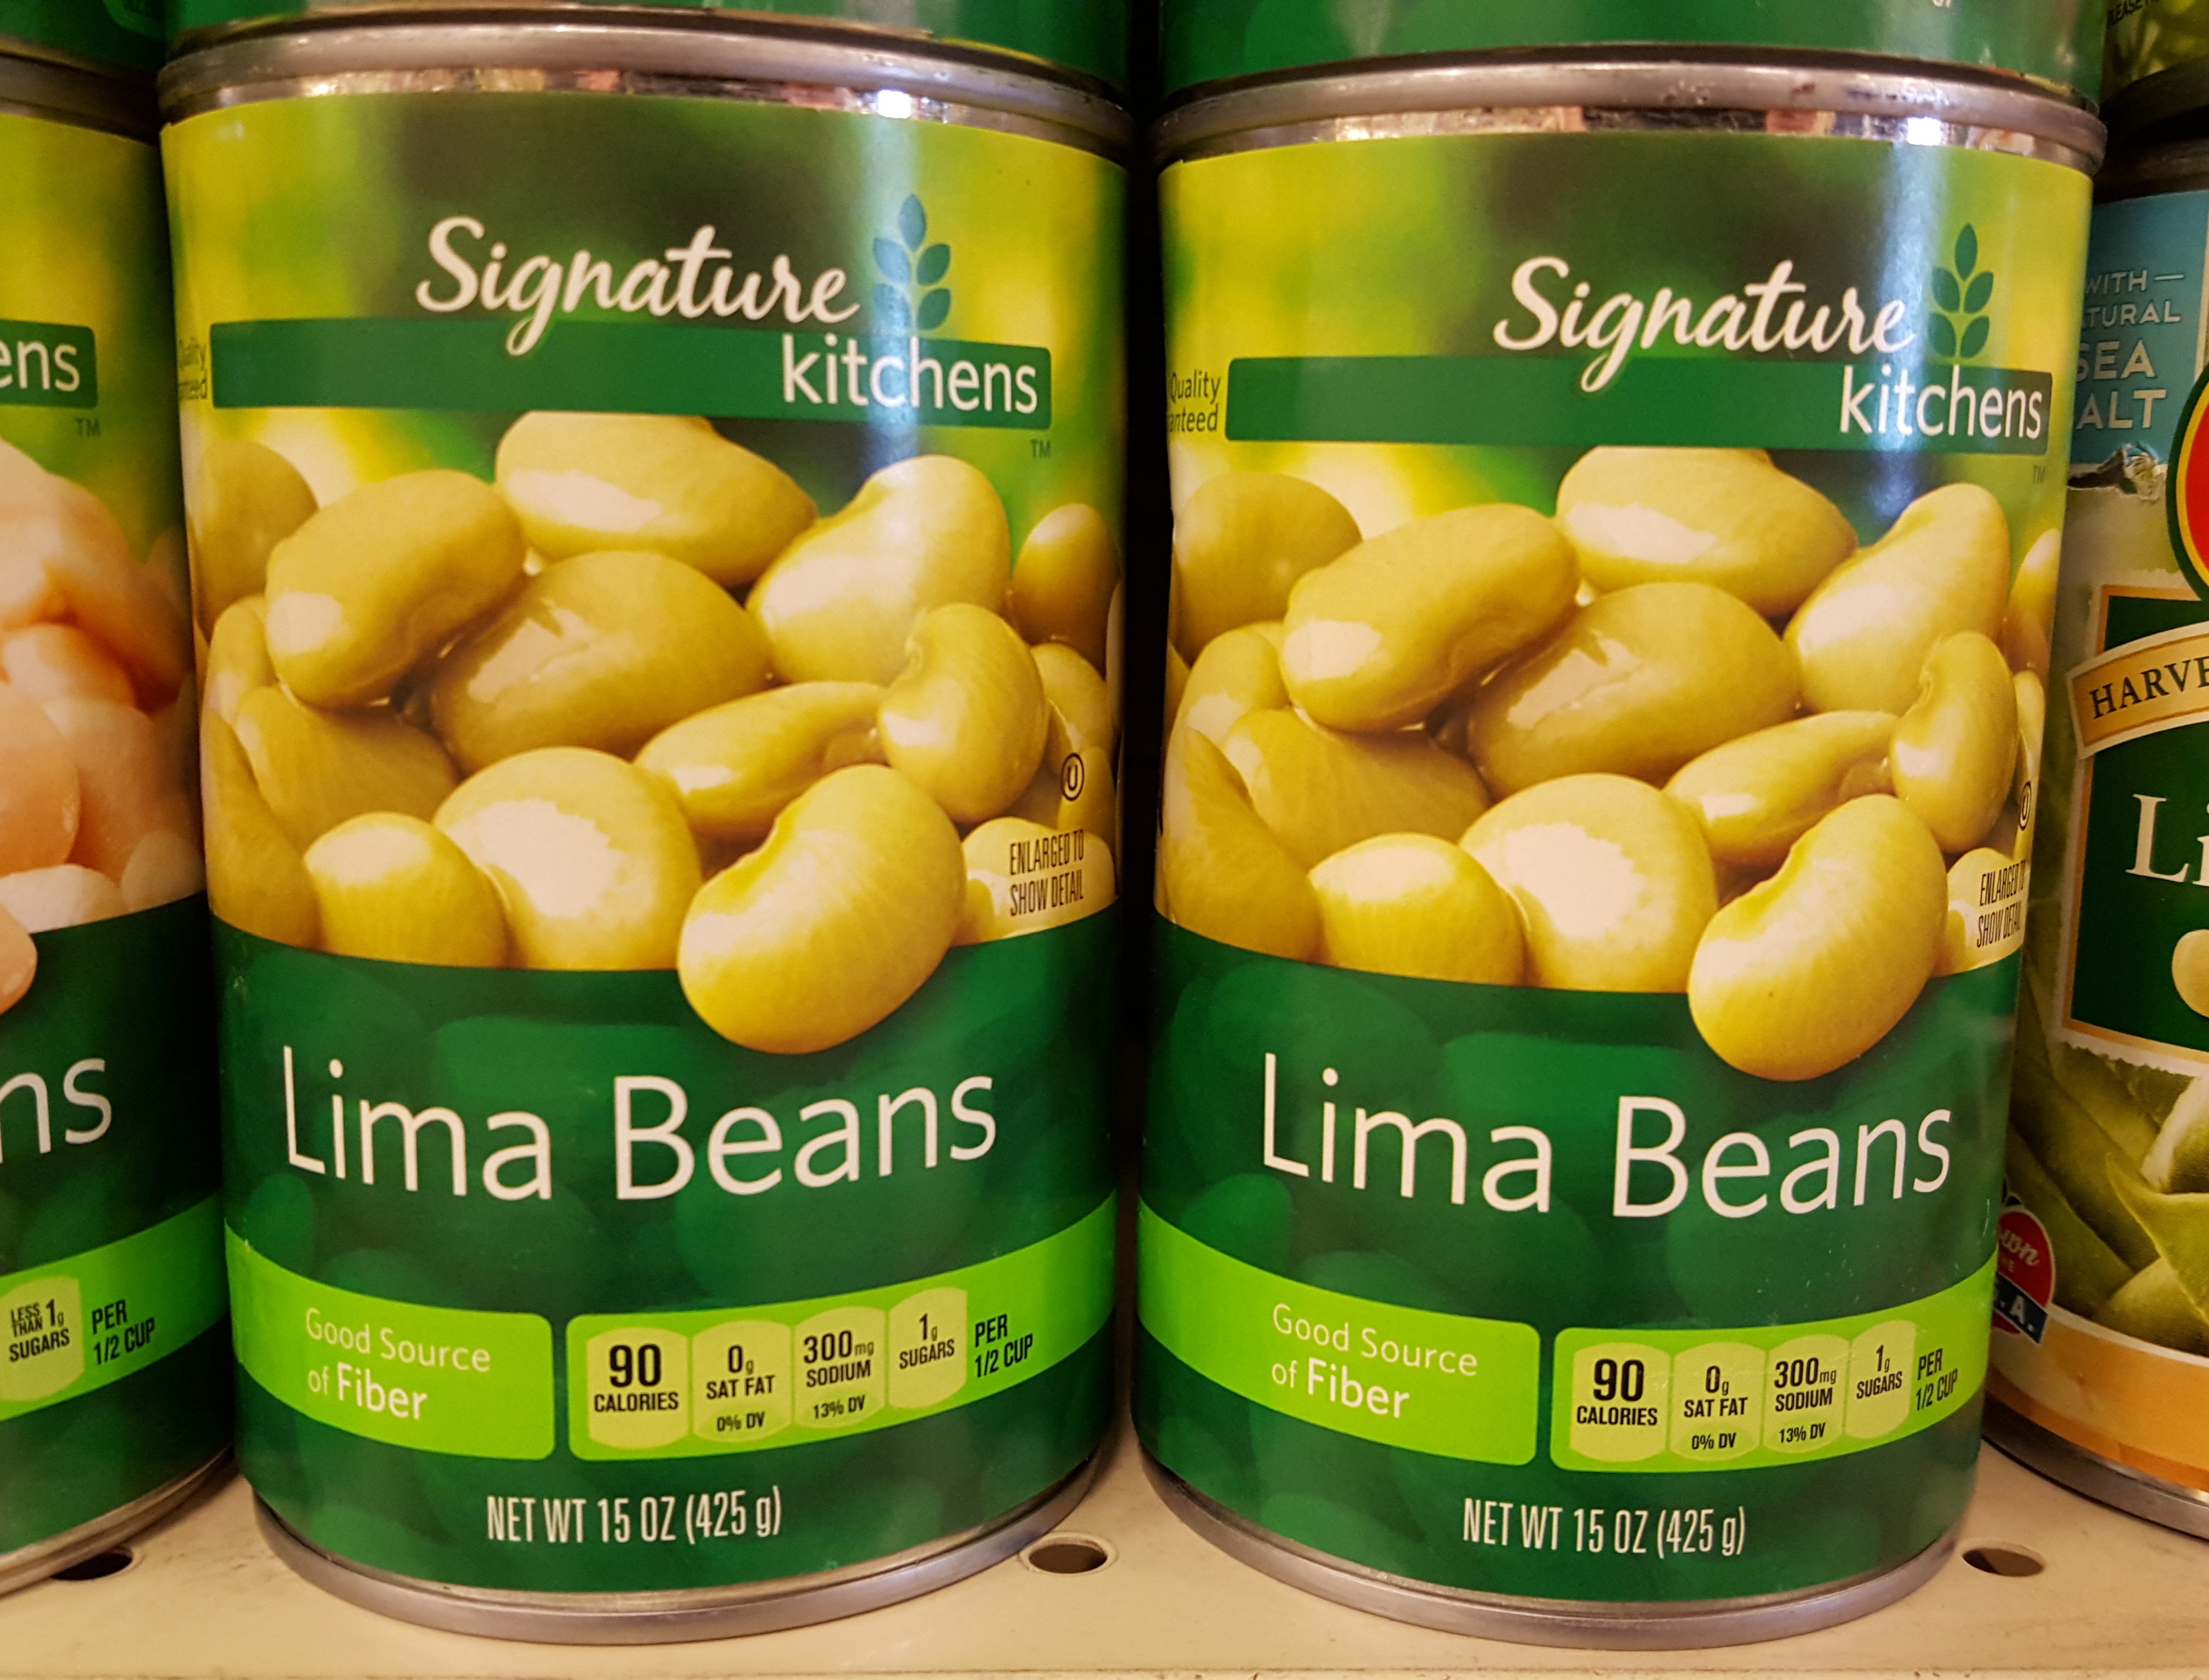 Lima Beans Backgrounds on Wallpapers Vista